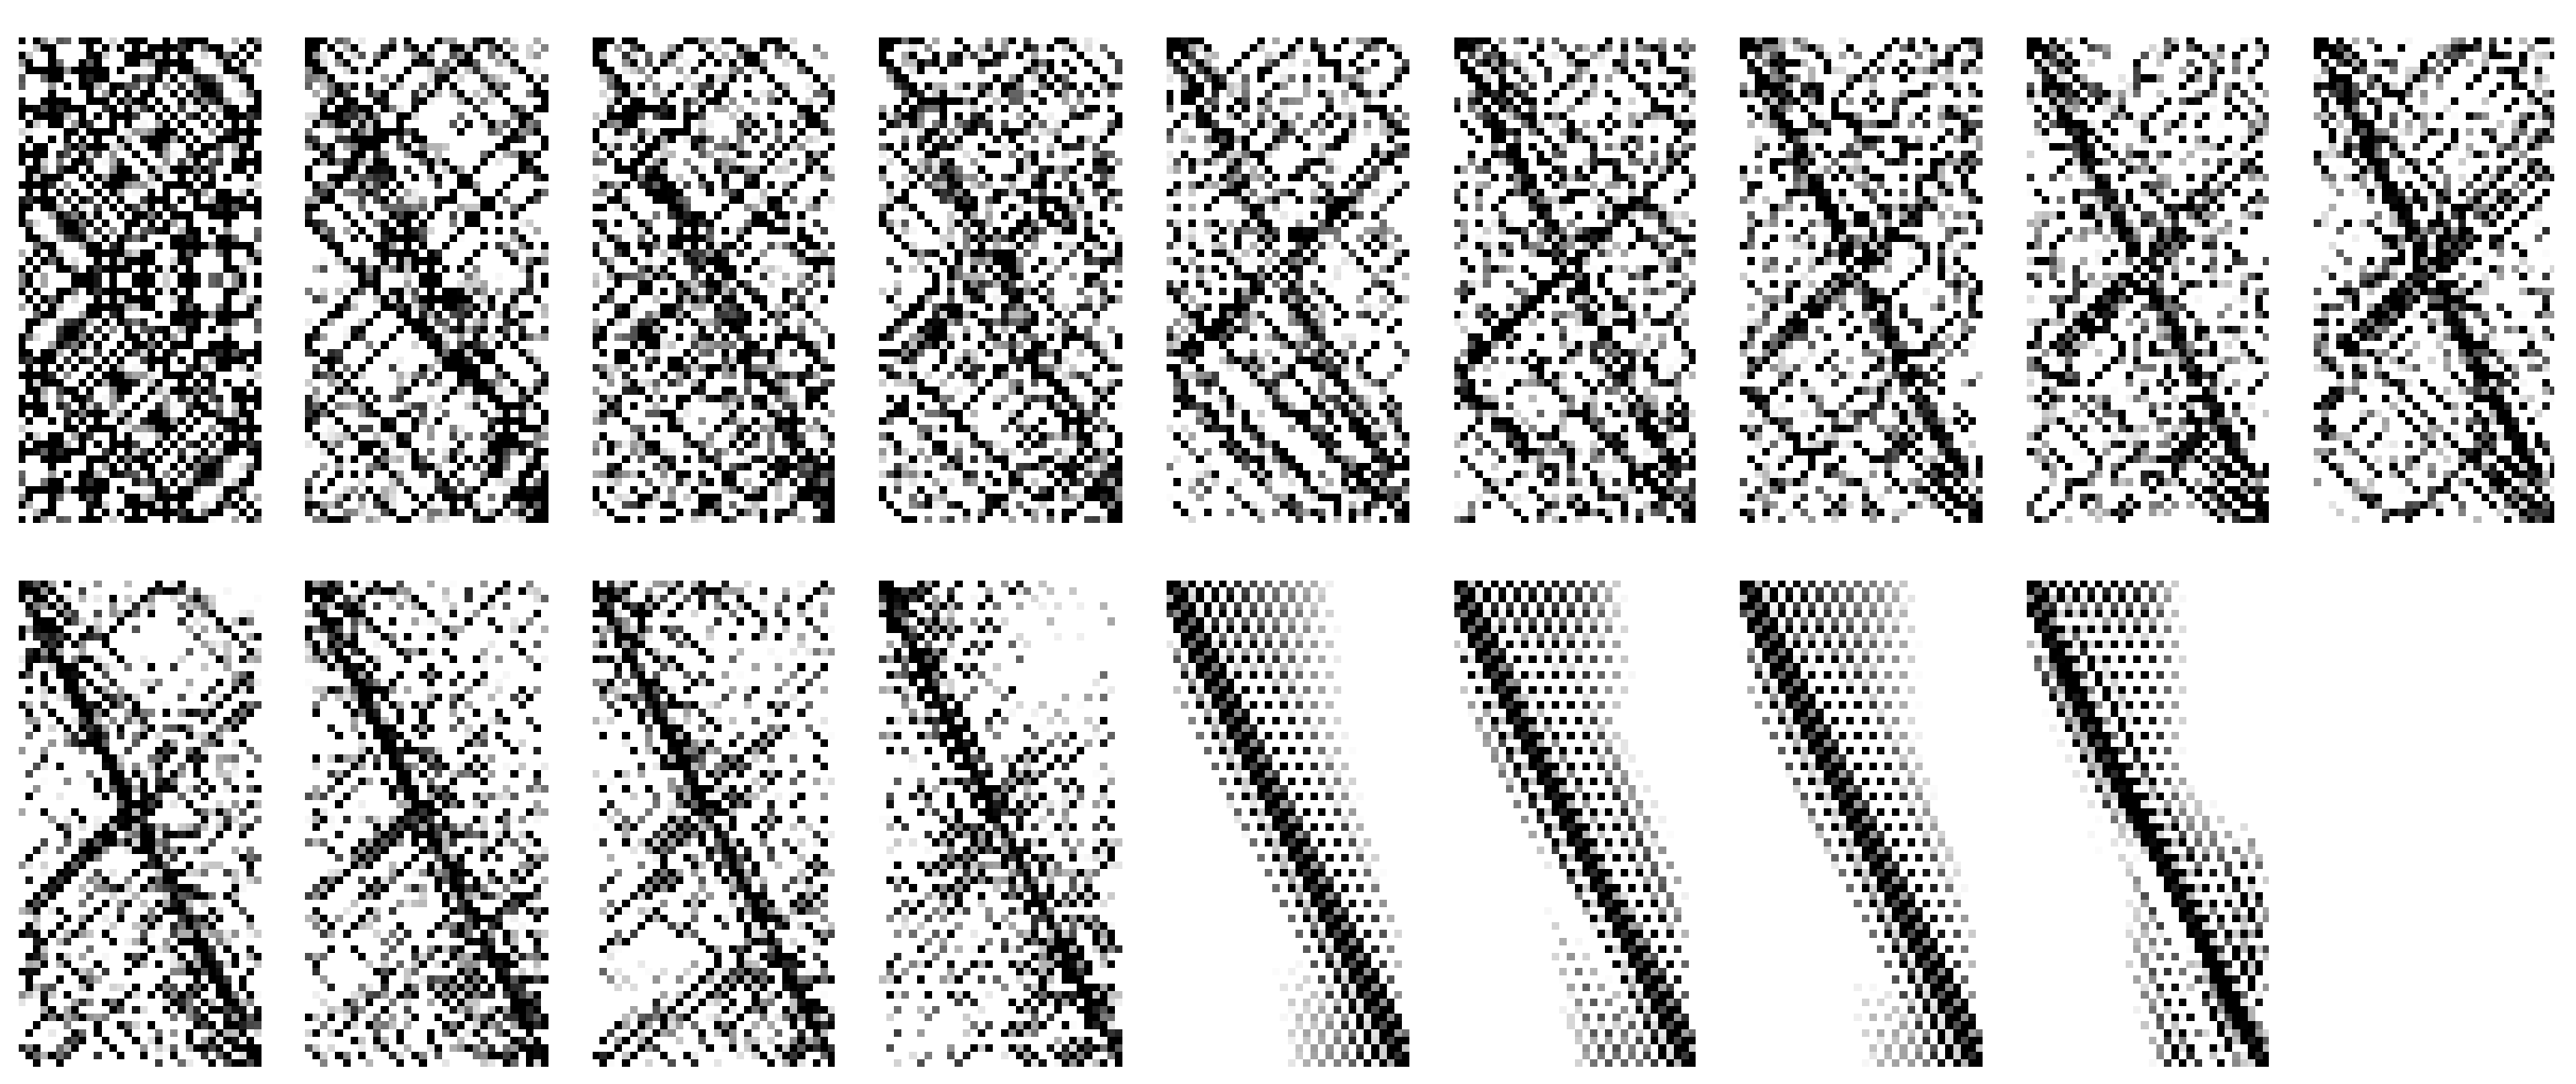 Figure 1: Several solutions of our objective function found by PyManOpt as s, the relative weight of the two terms of our objective function, is tuned from 0 (fully diffuse, top left) to 1 (fully local, bottom right). Within each subplot, grayscale indicates the magnitude of matrix entries. Note that the P matrices found with s=0 do not appear to be structured in a way which respects the locality of the original graphs, whereas the matrices with s=1 do.